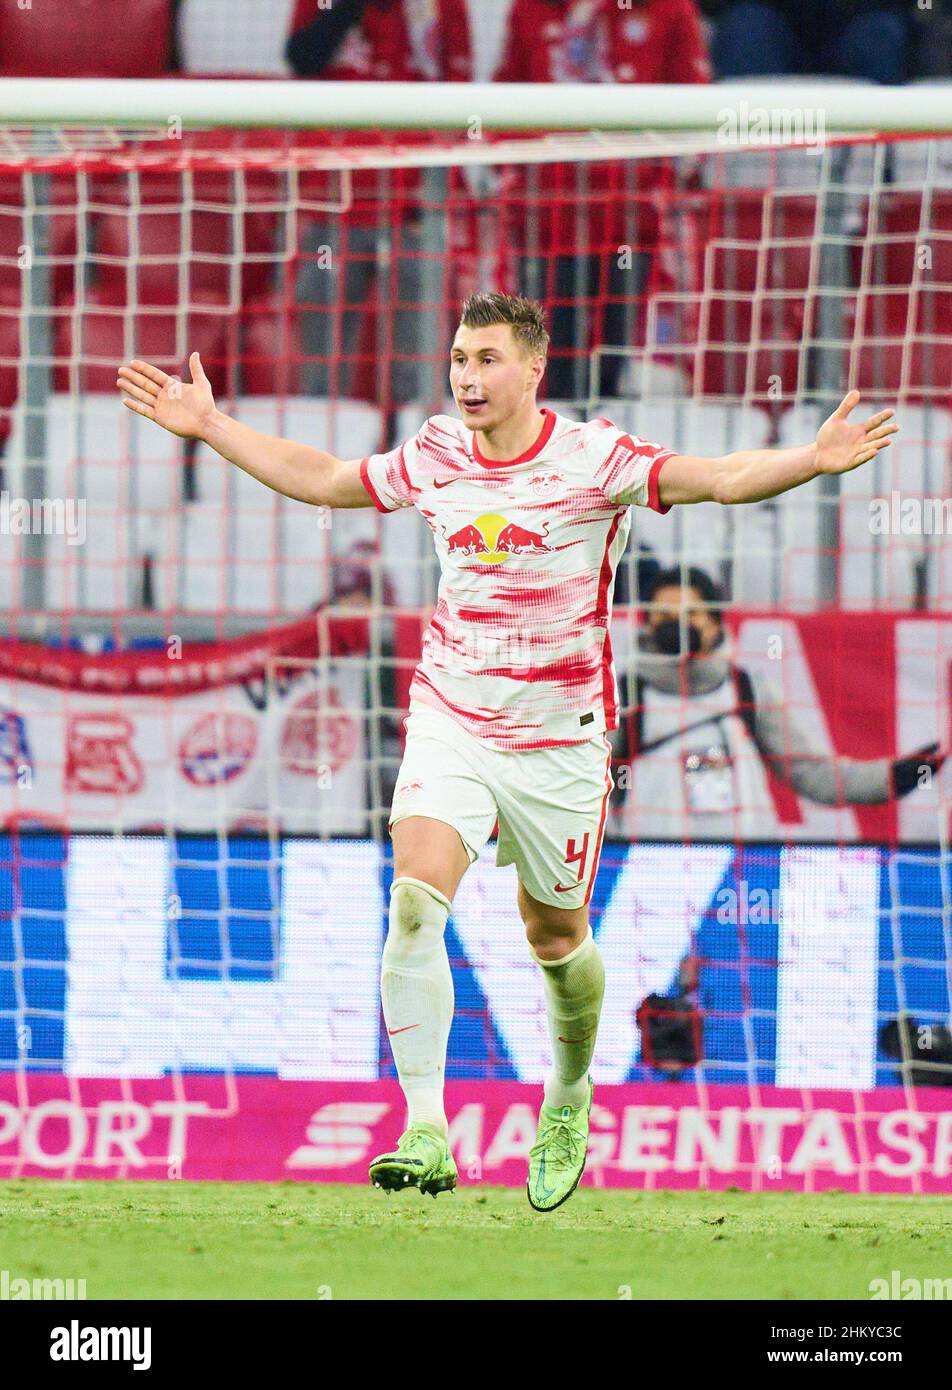 Willi ORBAN, RB Leipzig 4 sad in the match FC BAYERN MÜNCHEN - RB LEIPZIG 1.German Football League on Feb 5, 2022 in Munich, Germany. Season 2021/2022, matchday 21, 1.Bundesliga, FCB, München, 21.Spieltag. FCB © Peter Schatz / Alamy Live News    - DFL REGULATIONS PROHIBIT ANY USE OF PHOTOGRAPHS as IMAGE SEQUENCES and/or QUASI-VIDEO - Stock Photo